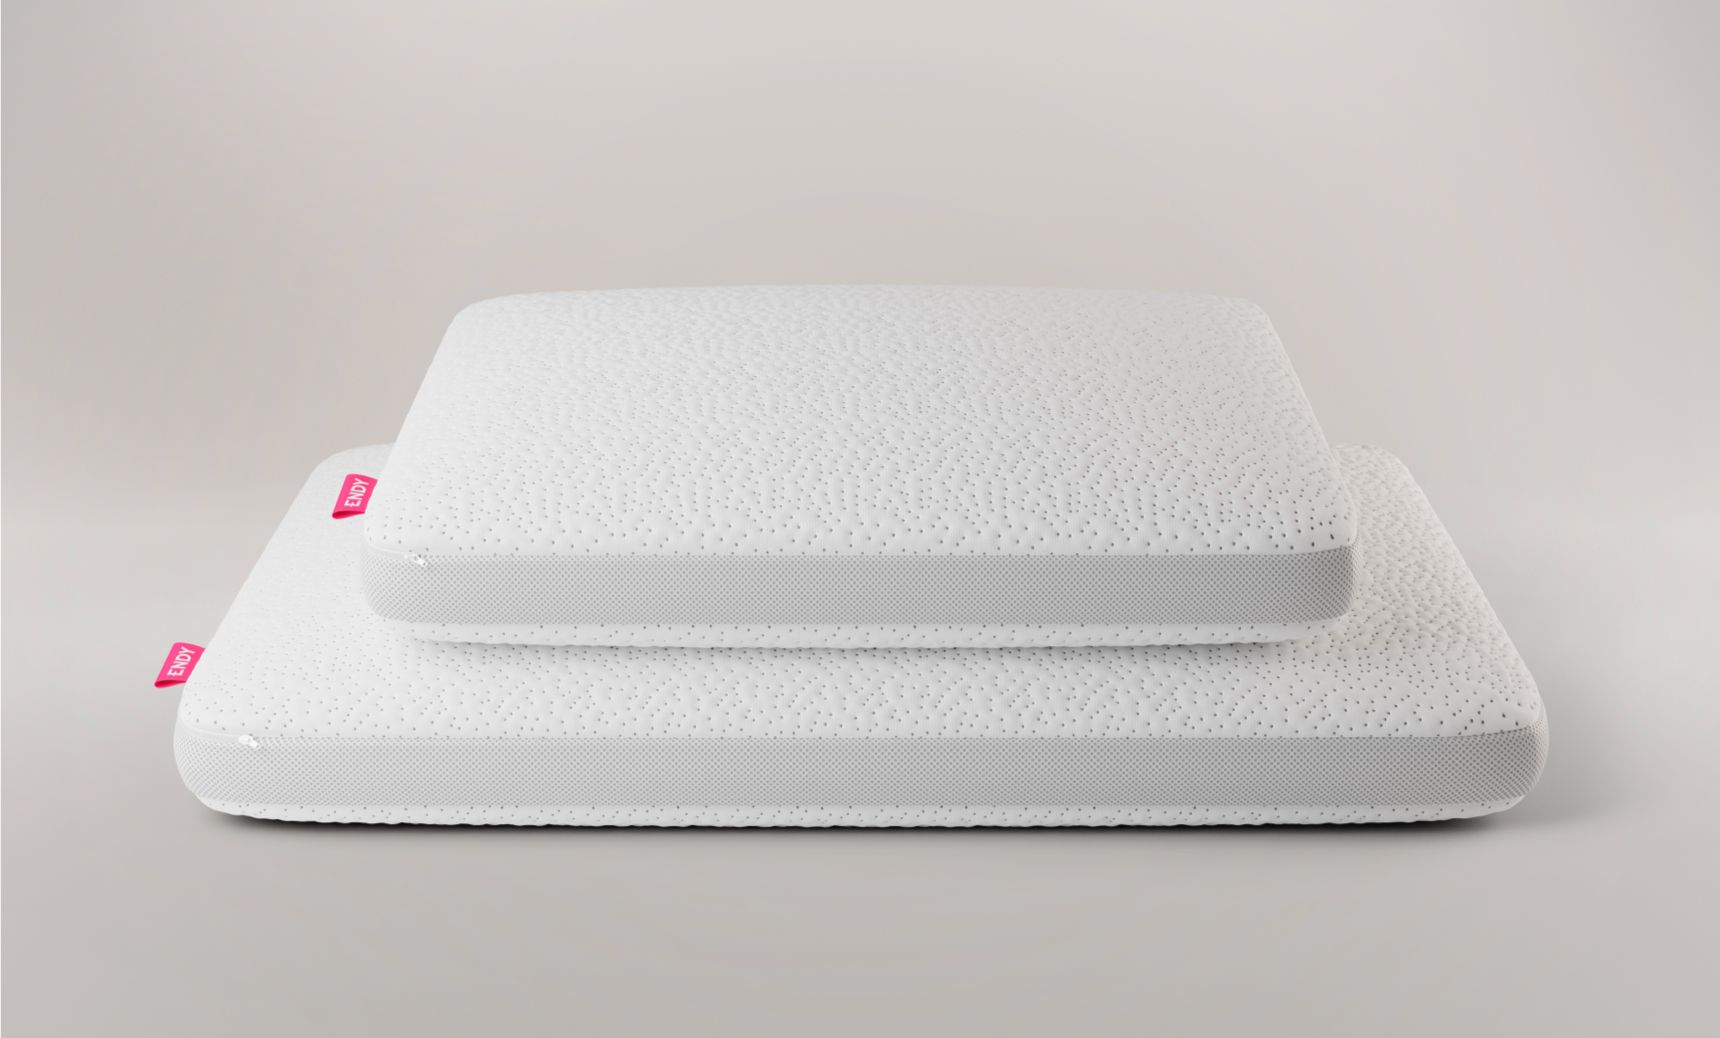 The Endy Memory Foam displayed in Standard and King Sizes